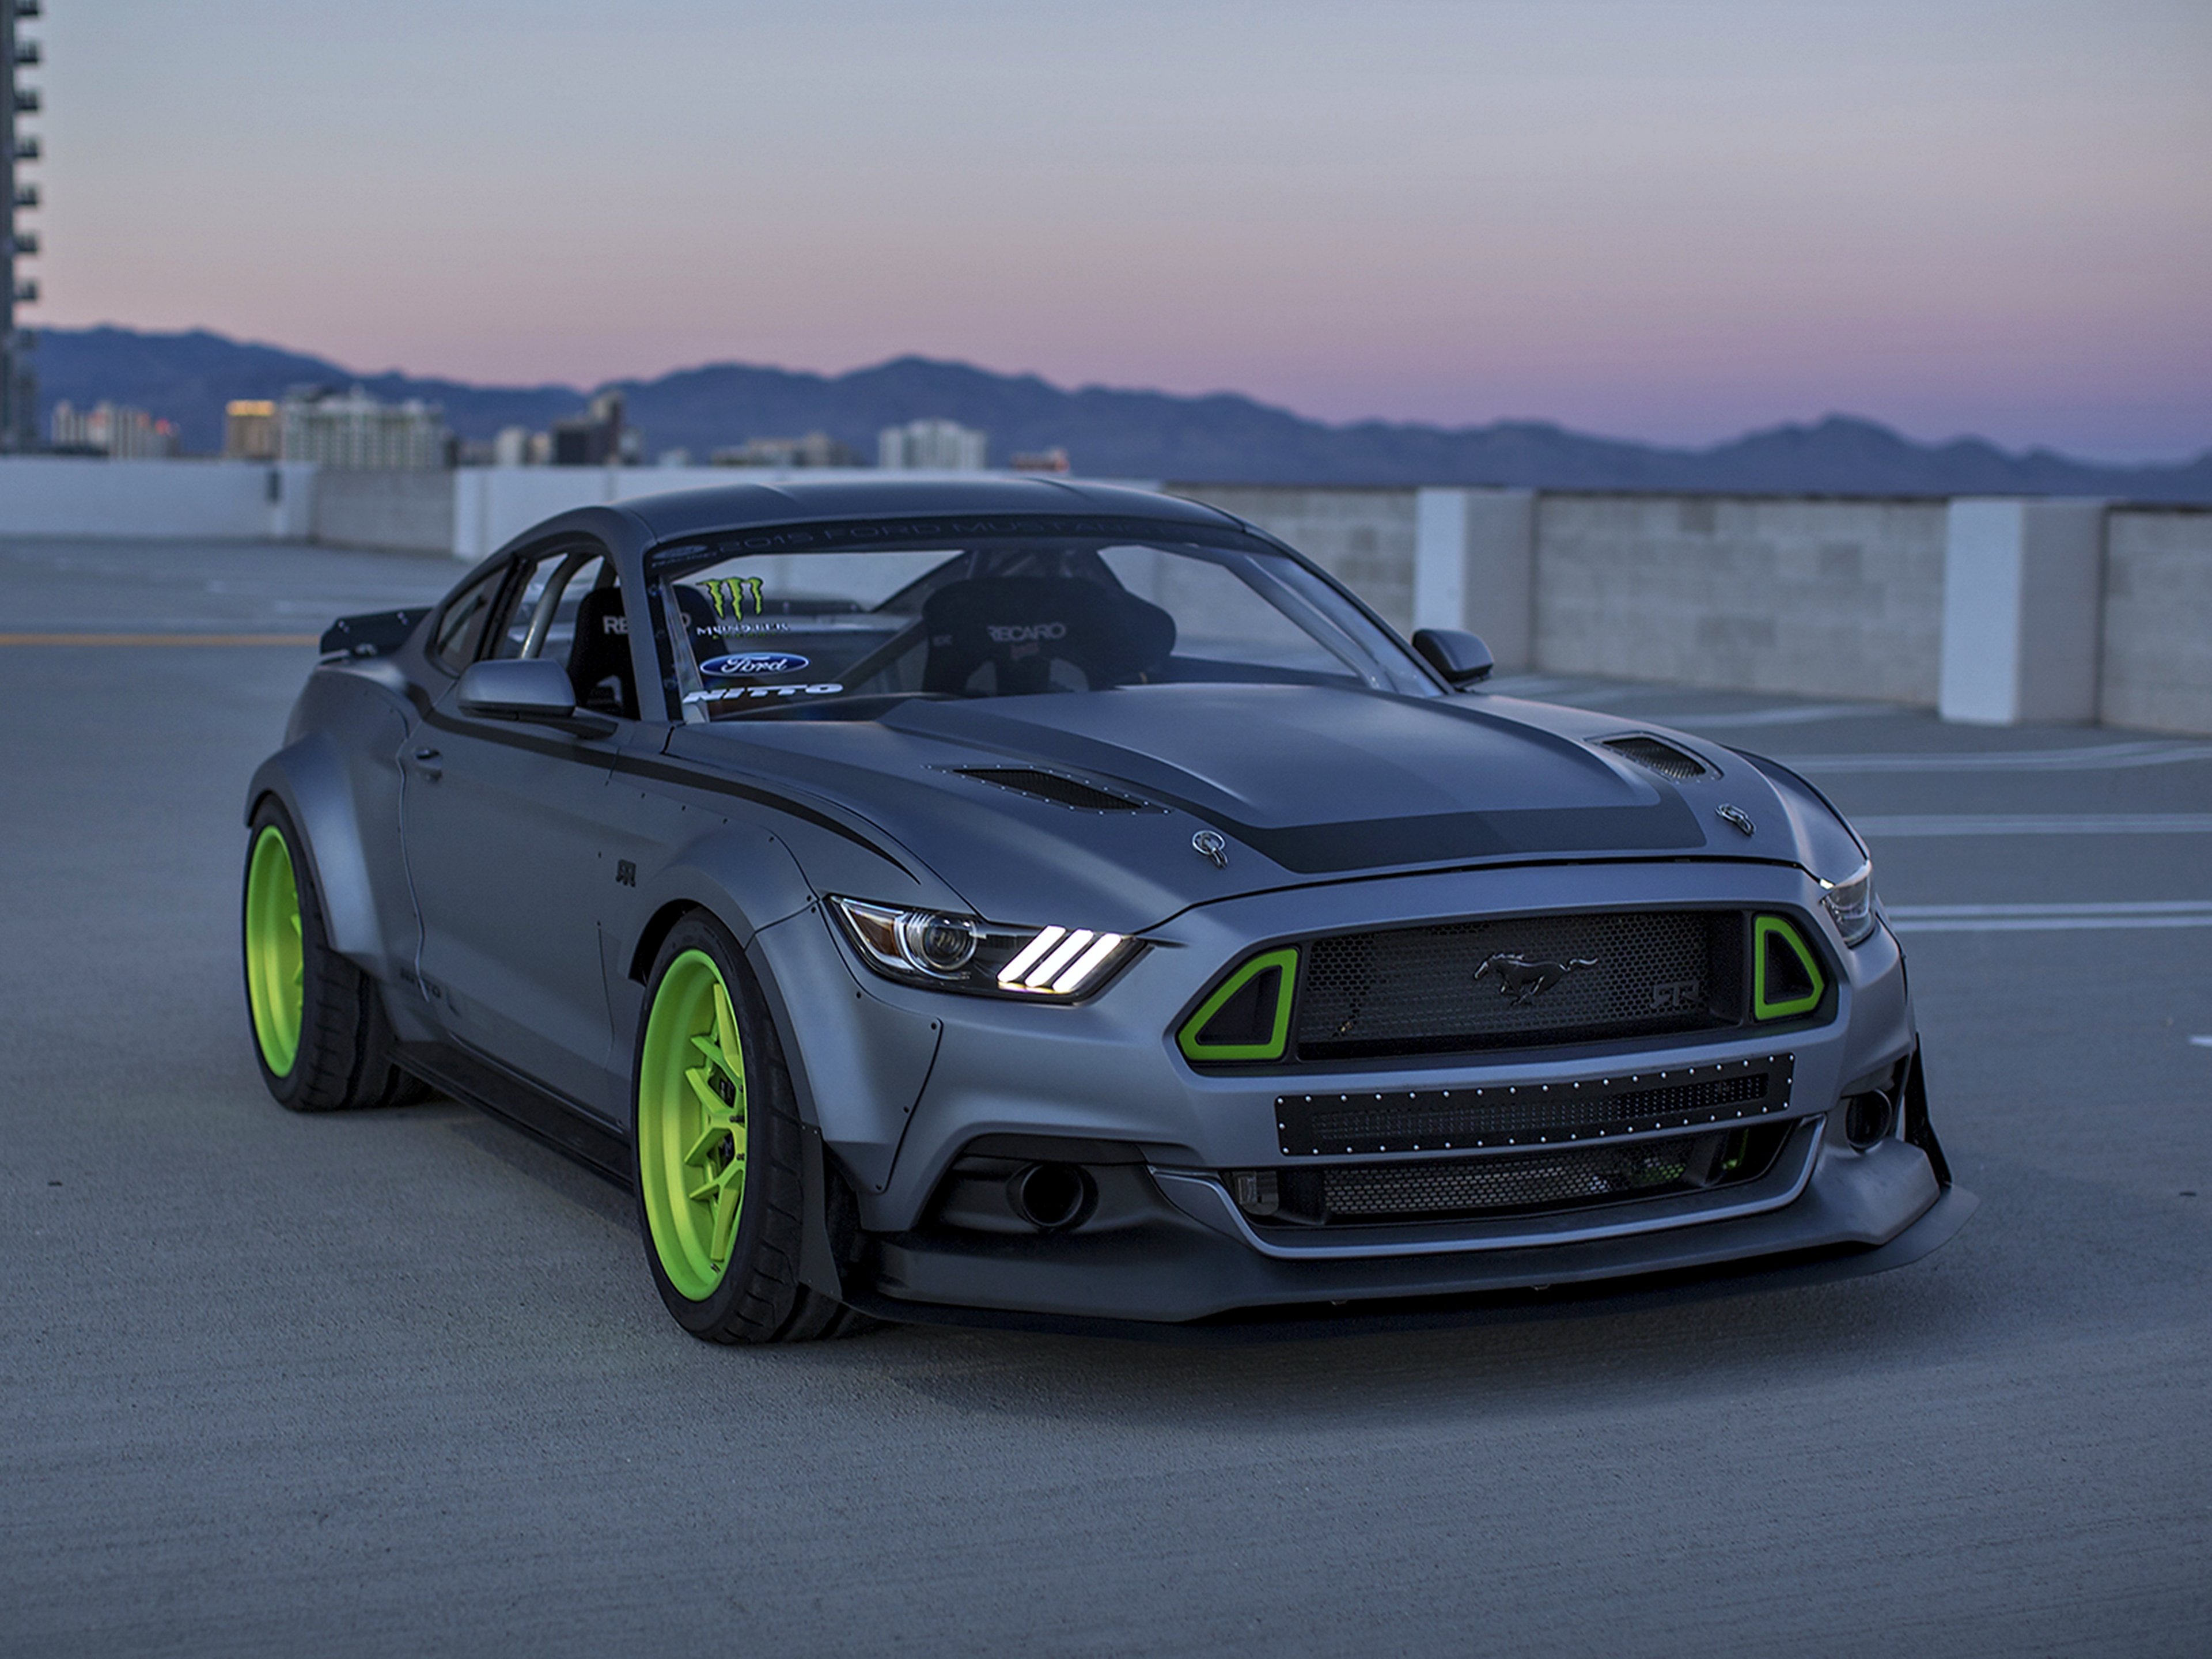 2014, Ford, Mustang, Rtr, Spec 5, Gray, Speed, Motors, Supercars, Cars